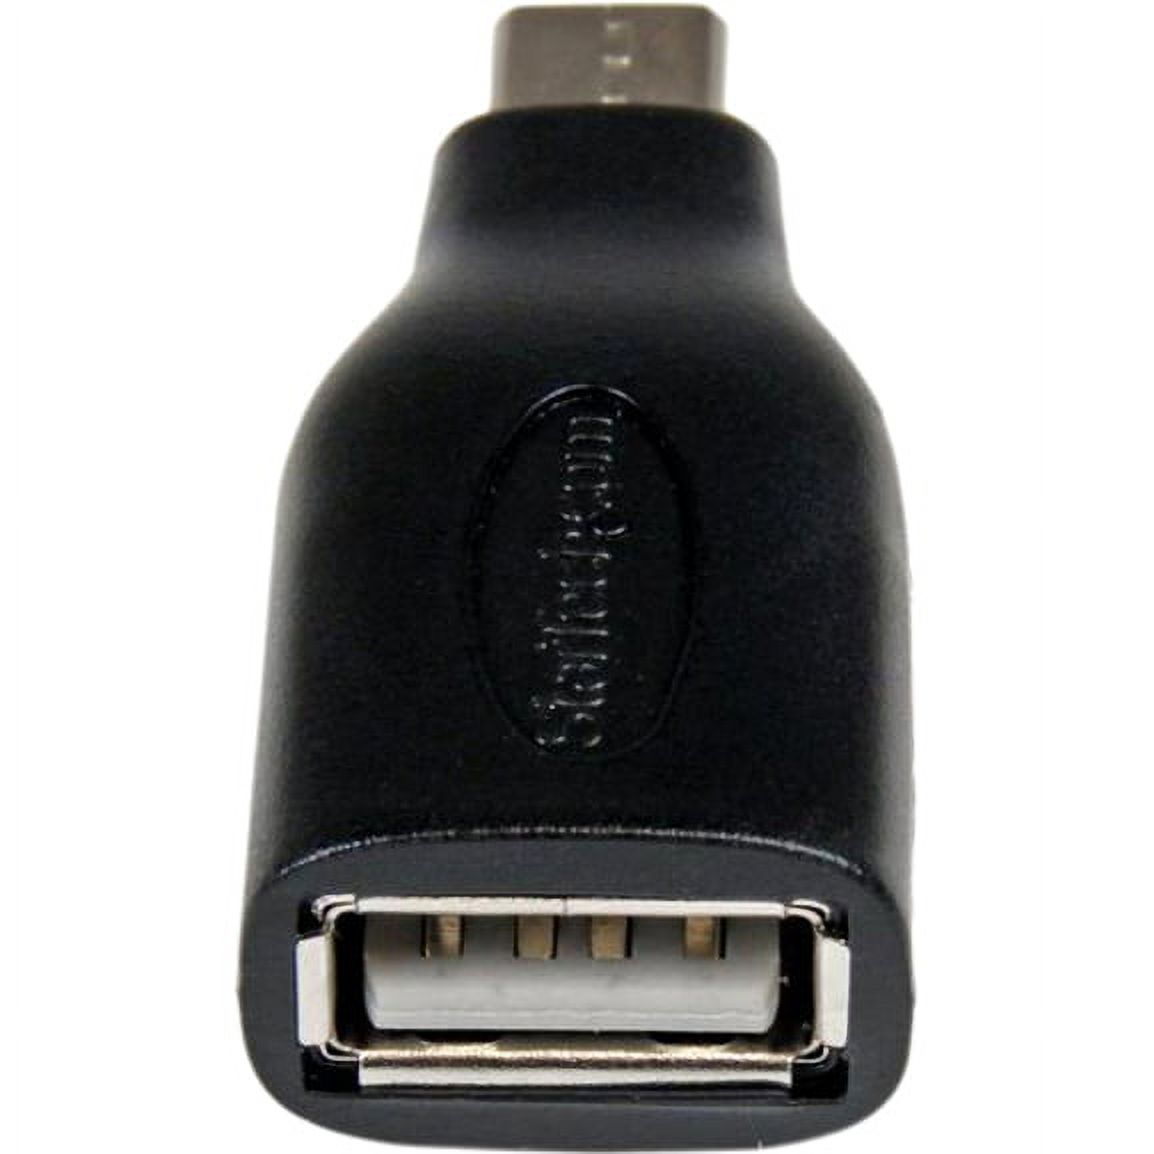 StarTech.com Micro USB OTG (On the Go) to USB Adapter - M/F - image 3 of 3